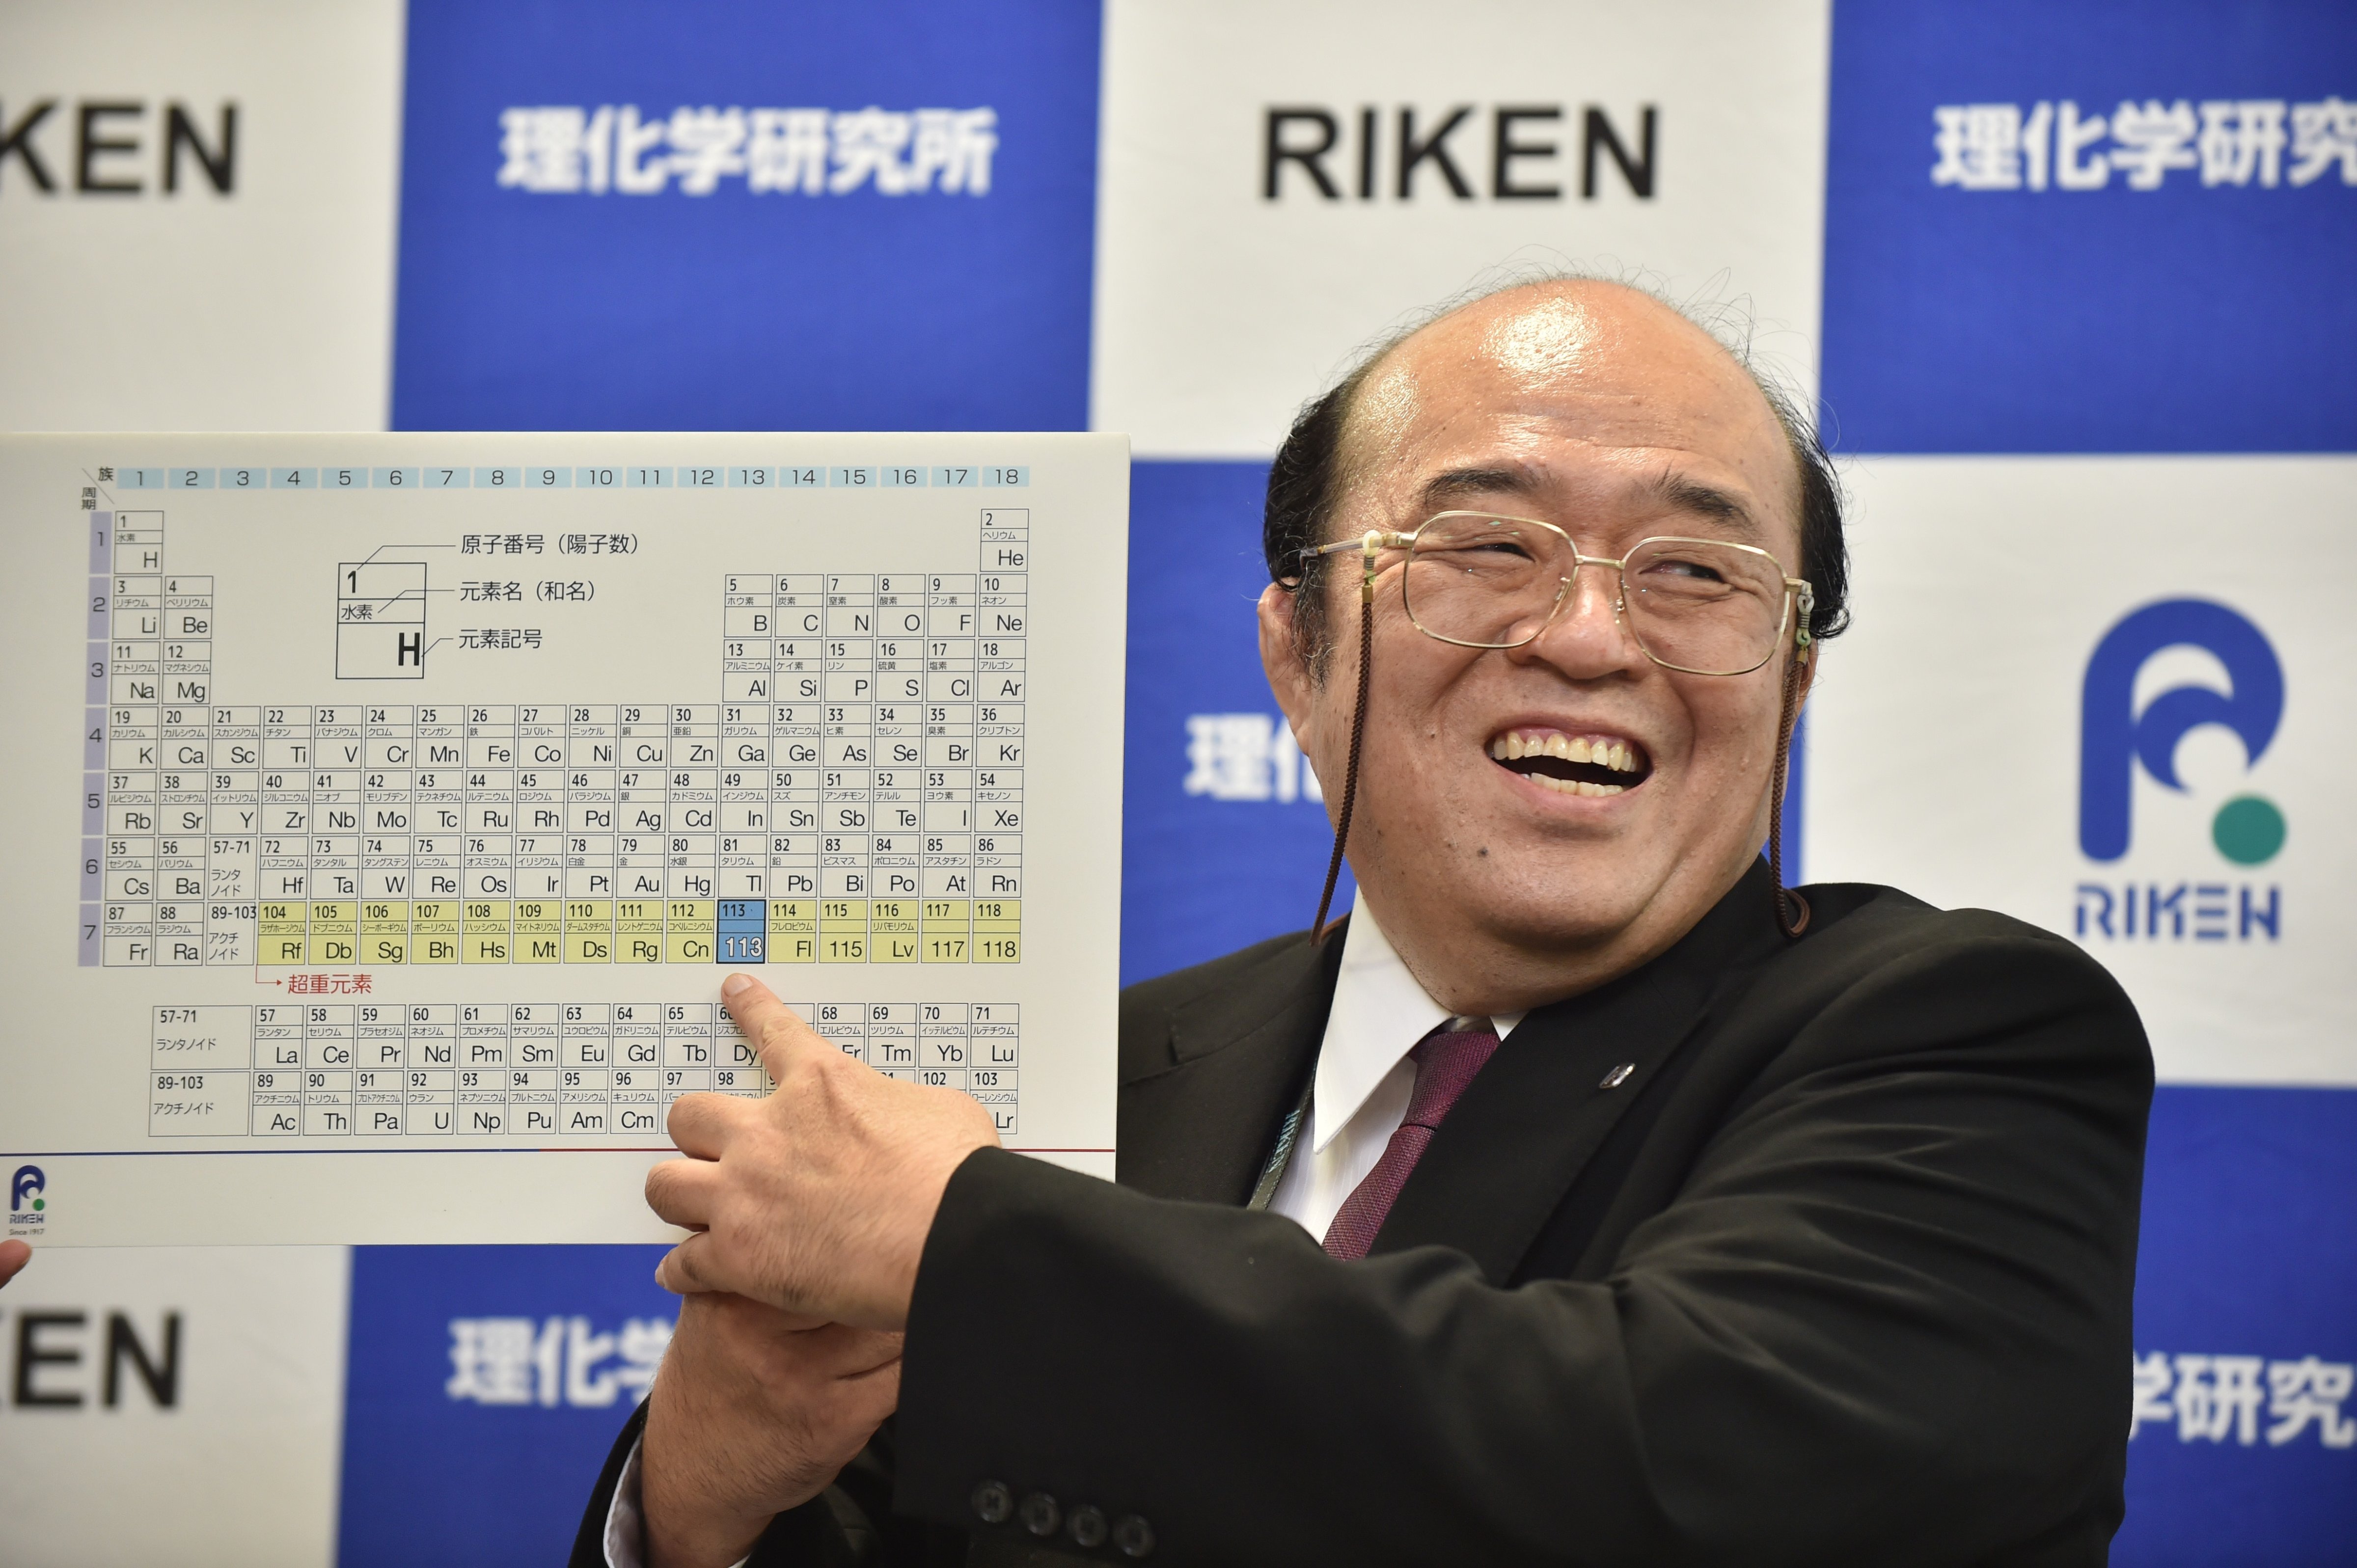 Kosuke Morita, the leader of the Riken team, smiles as he points to a board displaying the new atomic element 113 during a press conference in Wako, Saitama prefecture on December 31, 2015 (Kazuhiro Nogi—AFP/Getty Images)